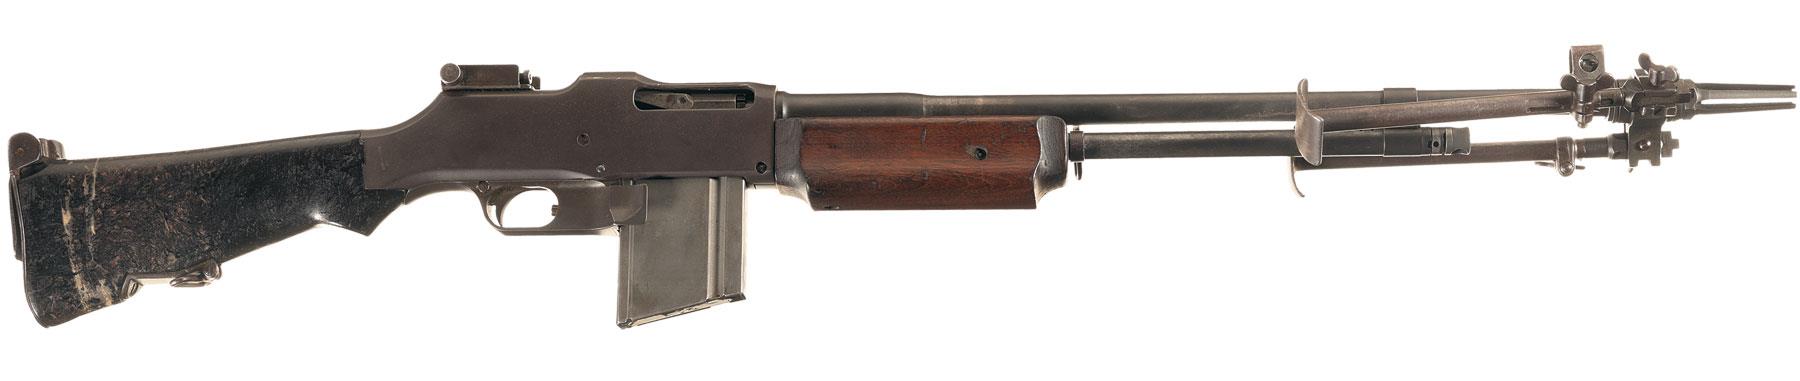 Browning M1918a2 Fully Automatic Nfa Rock Island Auction